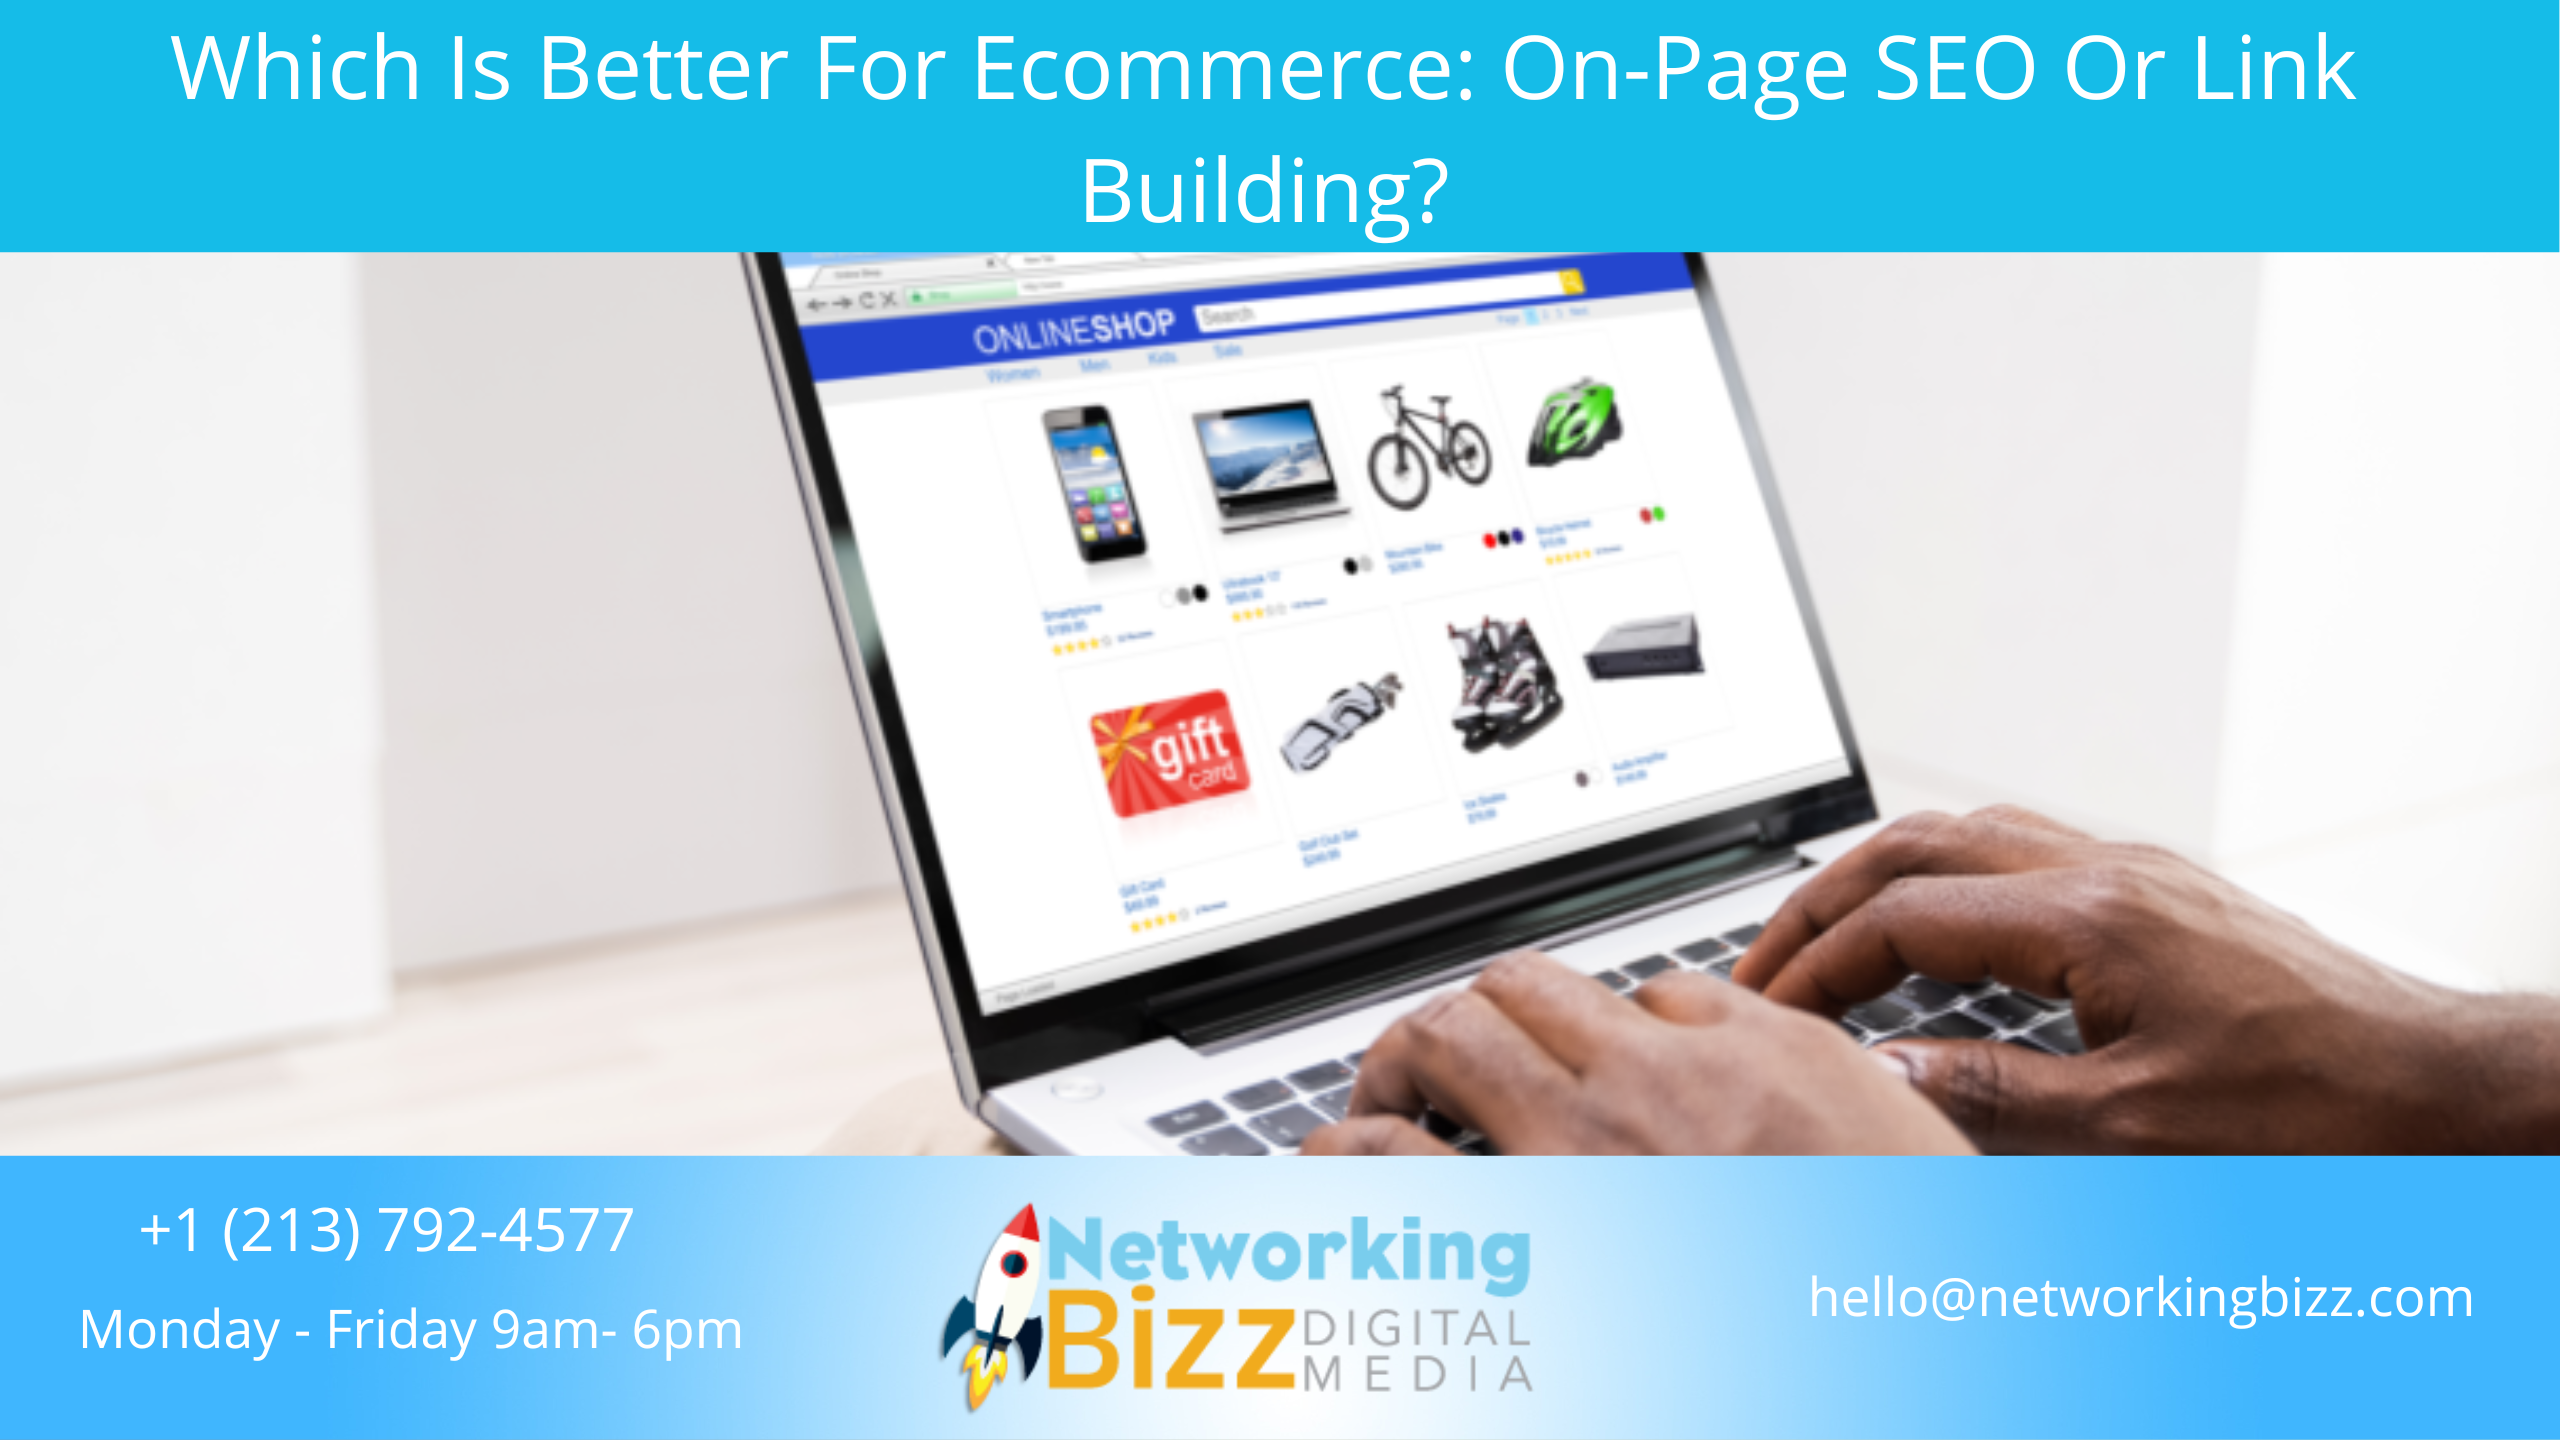 Which Is Better For Ecommerce: On-Page SEO Or Link Building?